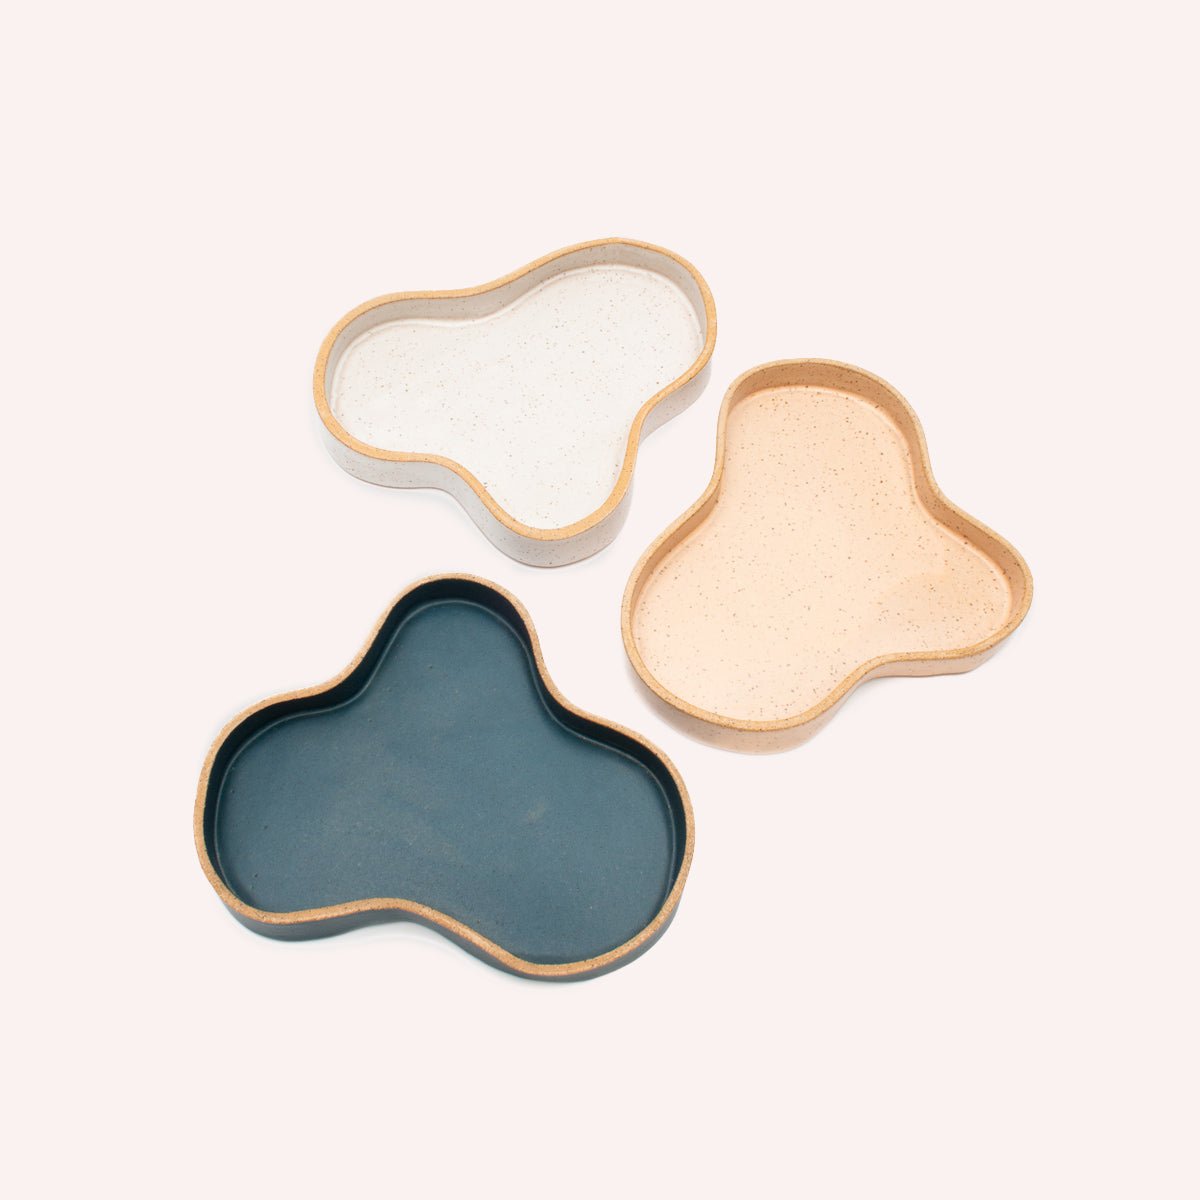 Three Blob Trays centered on a white background. From clockwise: white, pink and blue. The Blob Trays are designed and handmade by Kohai Ceramics in Portland, OR.